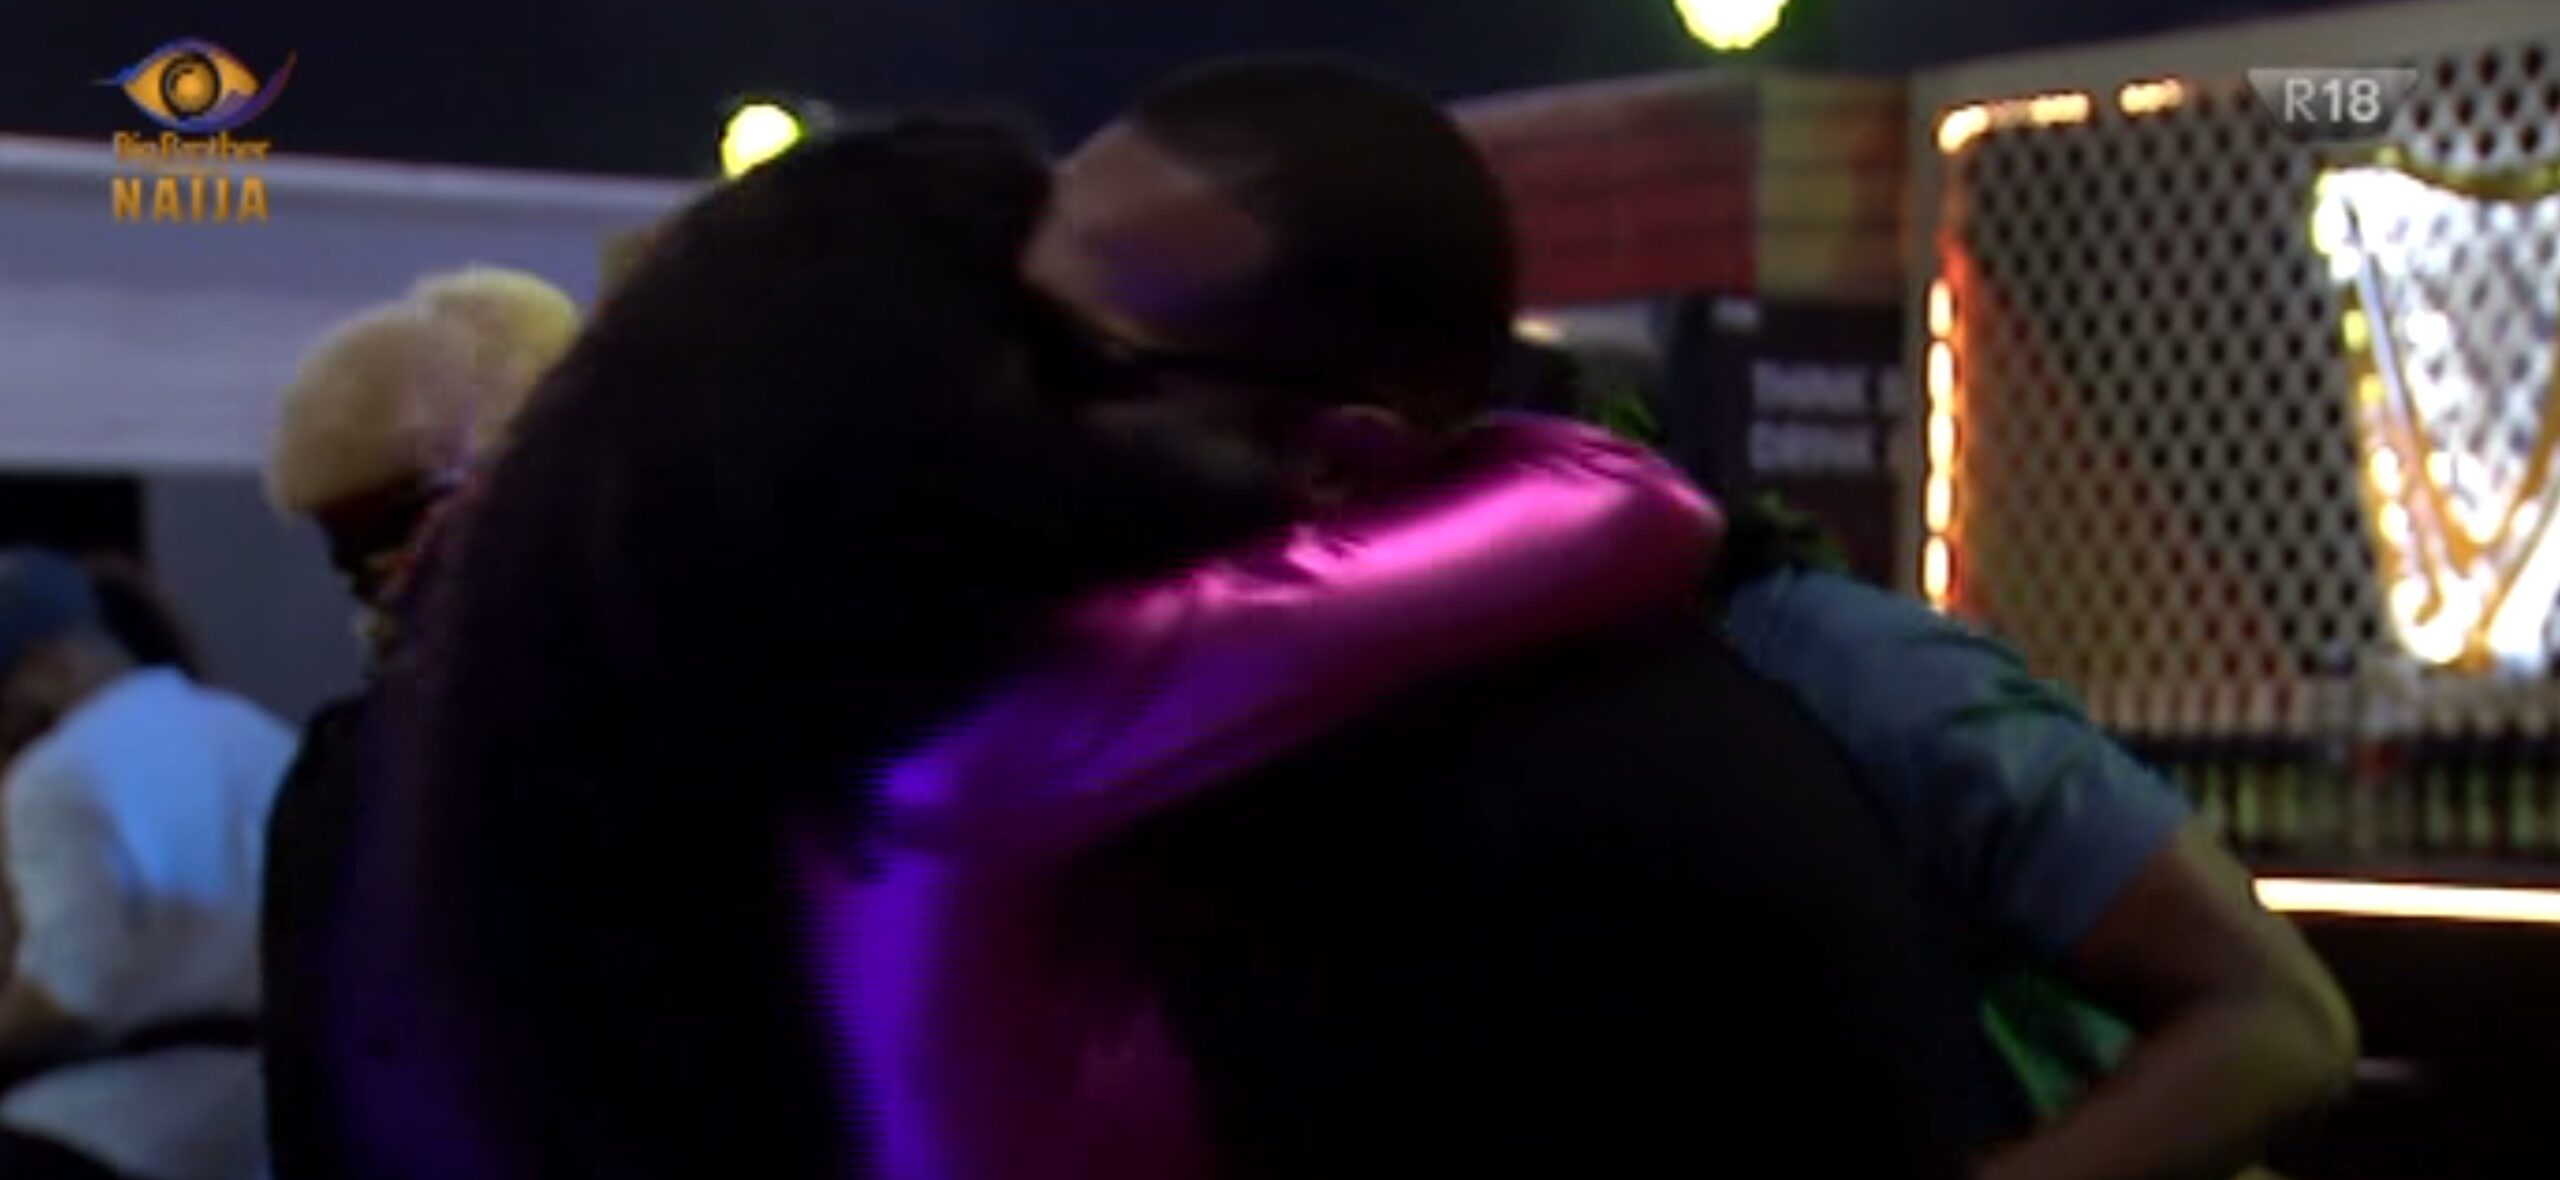 #BBNaija2020... The Unusual Kiss of the Night Came From?